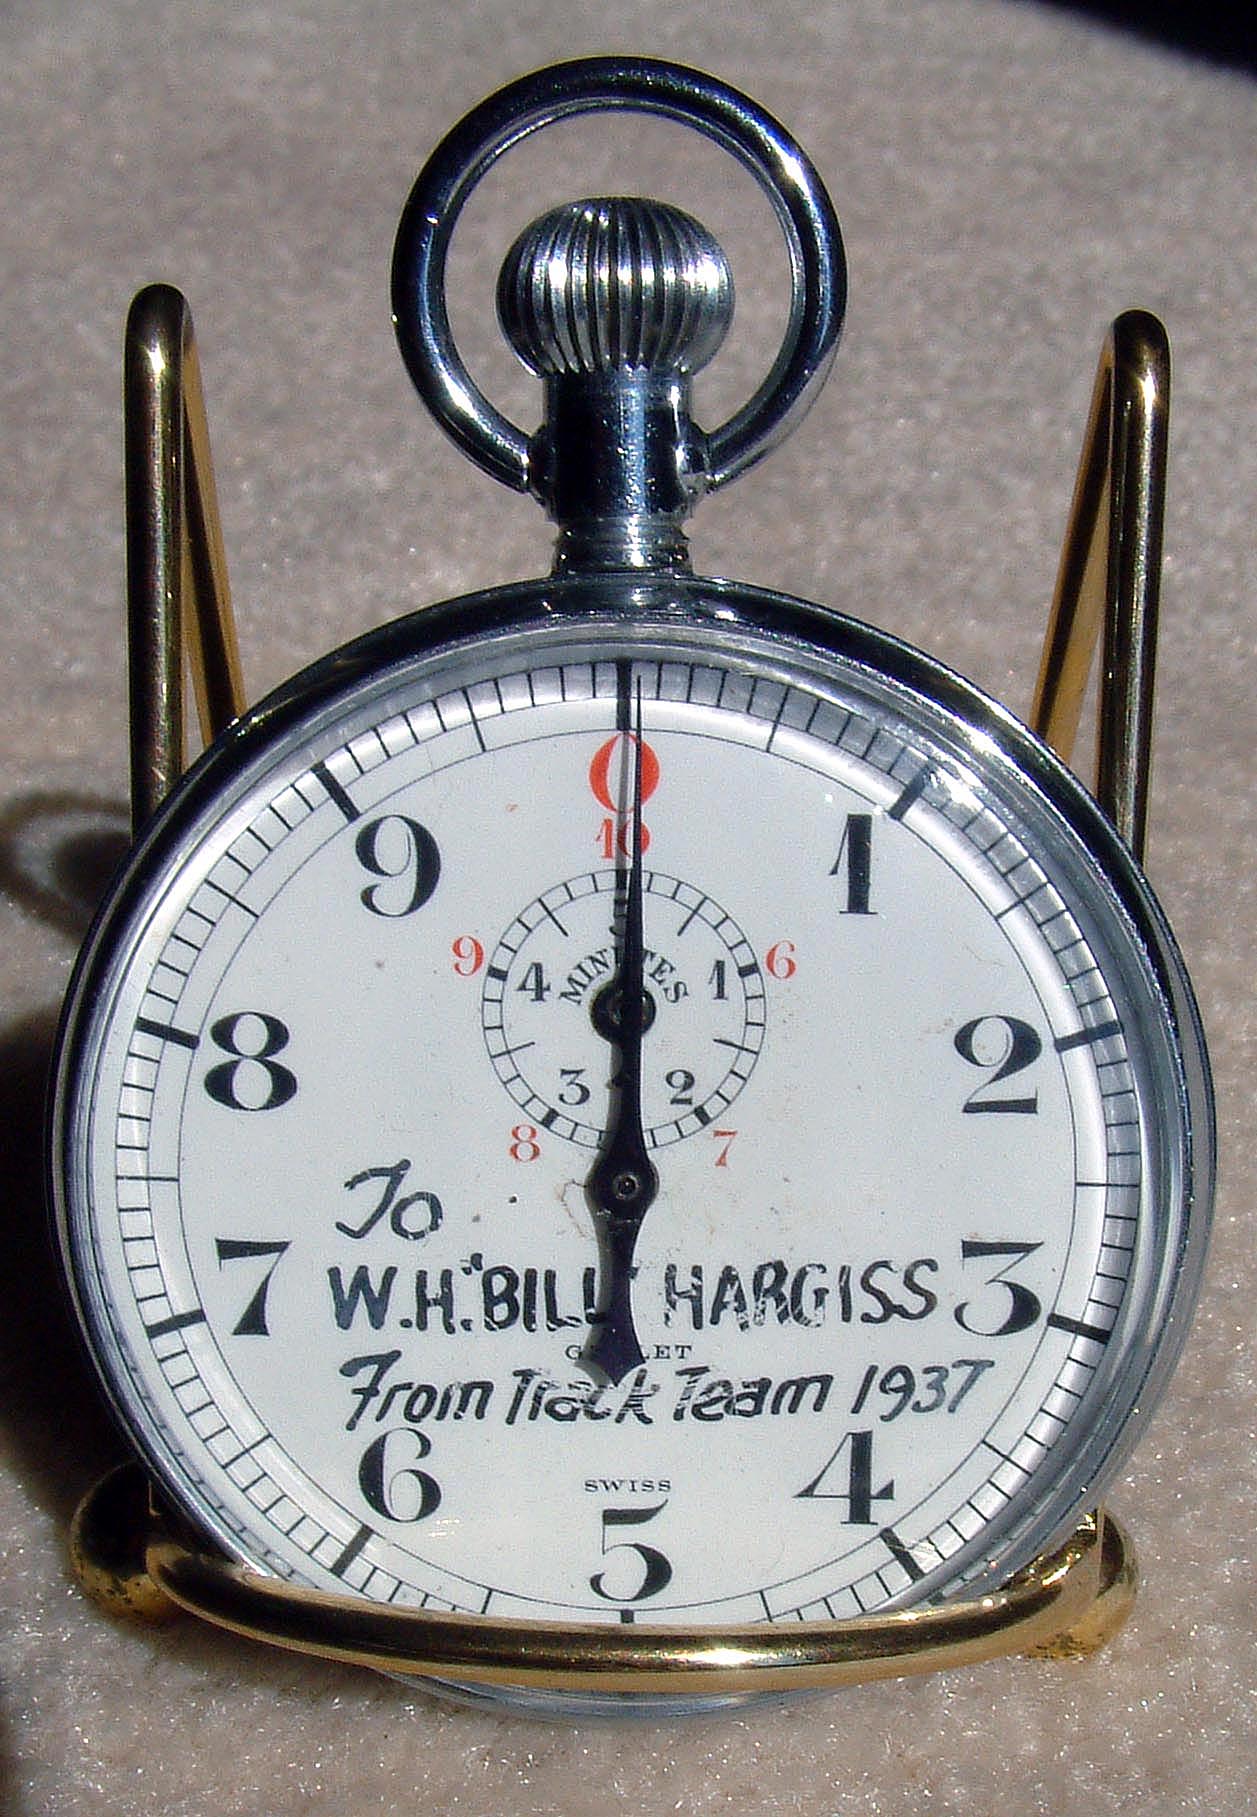 Stopwatch to Bill Hargiss from the KU Track Team of 1937